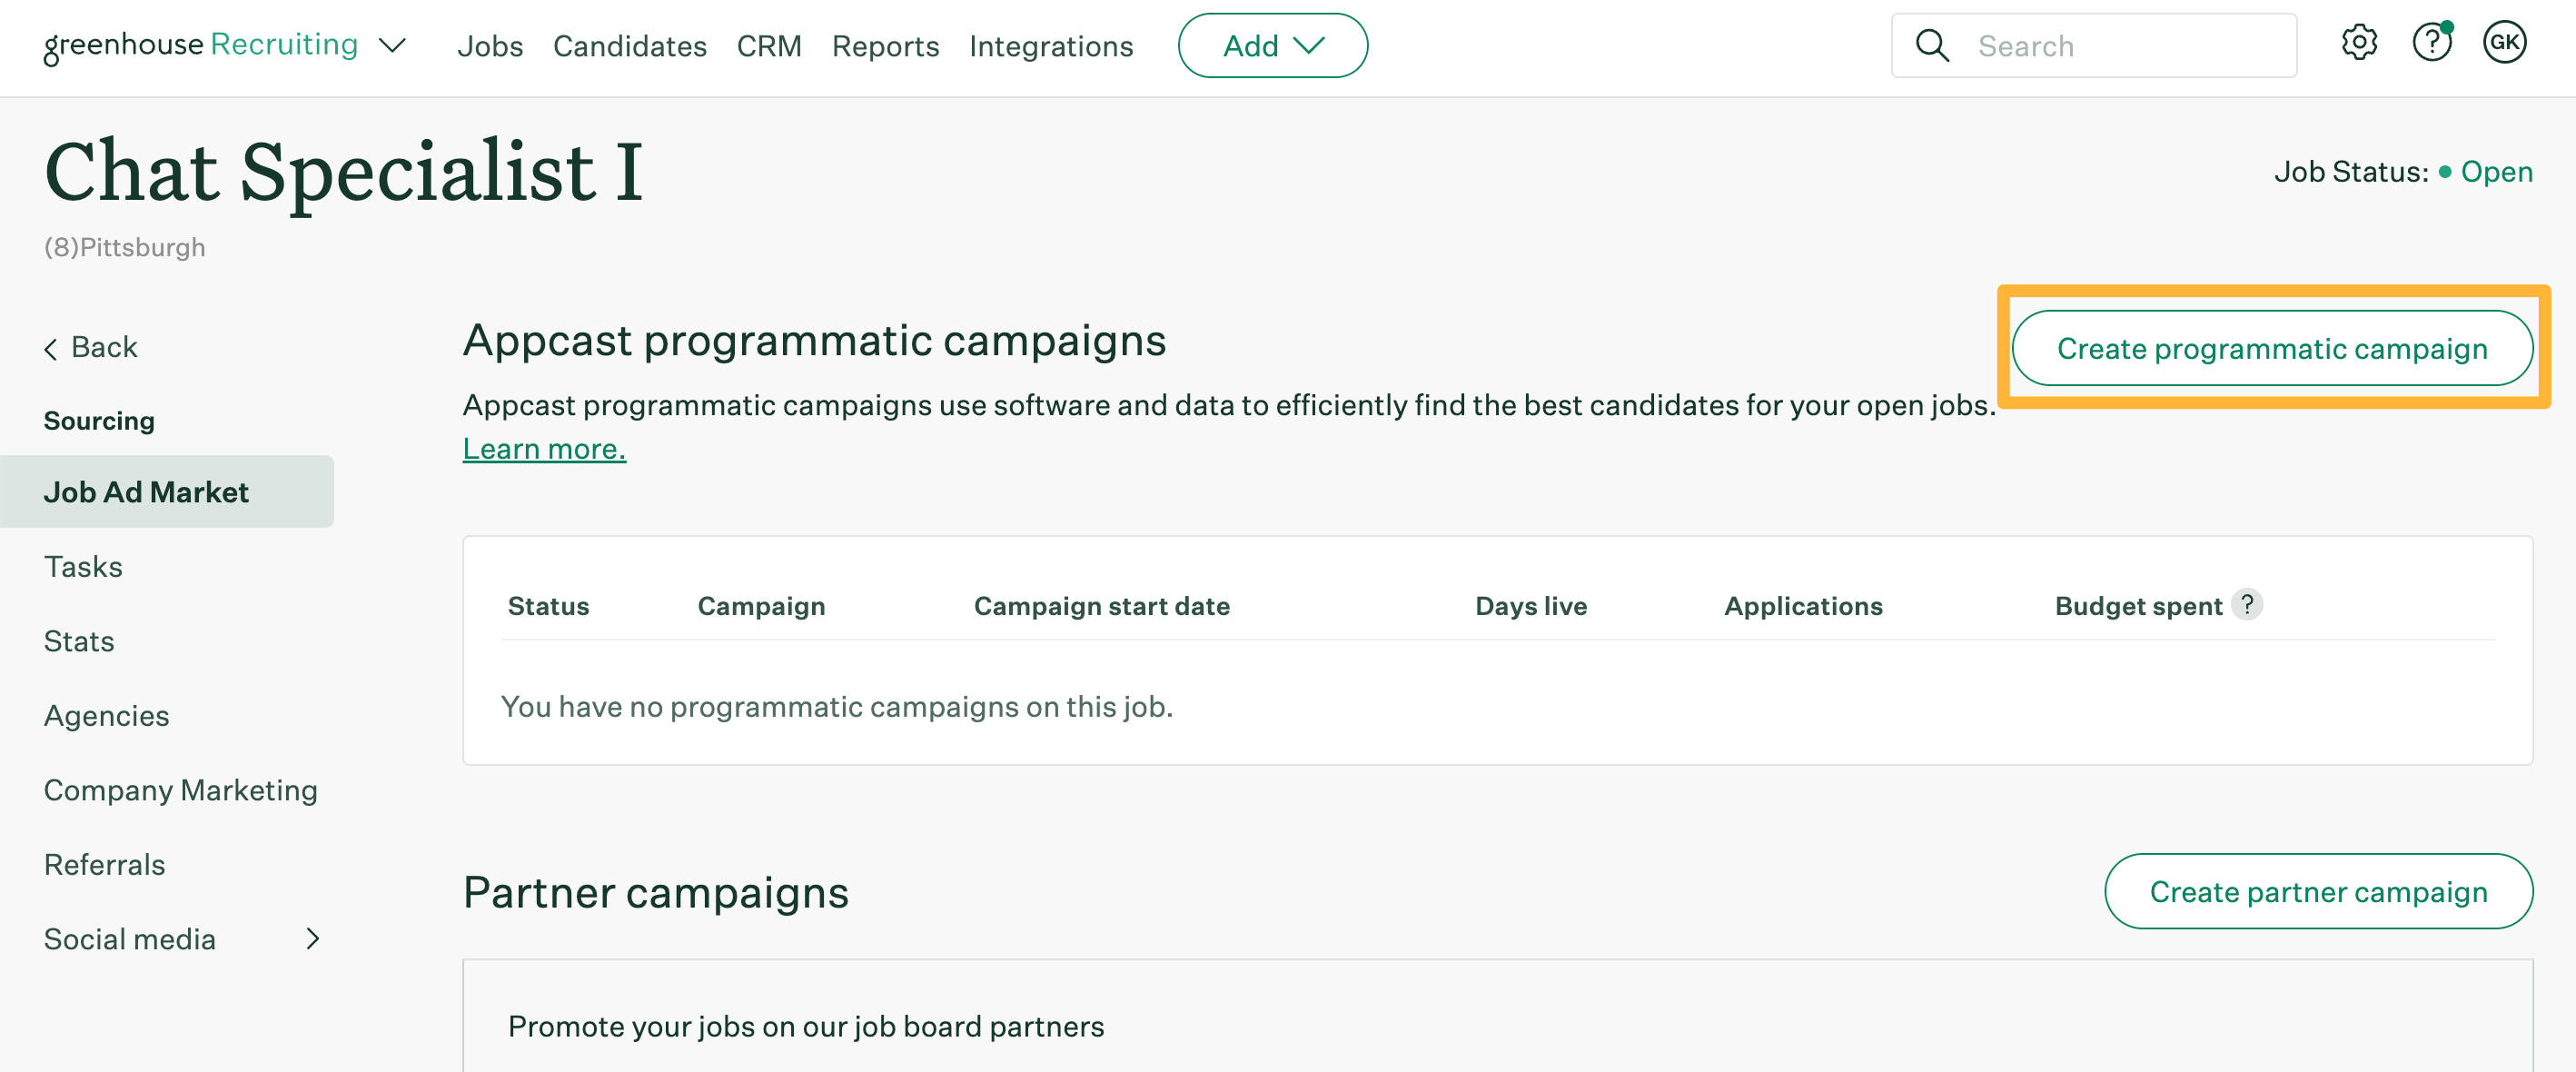 Job  Ad  Market  page  with  an  orange  box  highlighting  the  button  Create  programmatic  campaign